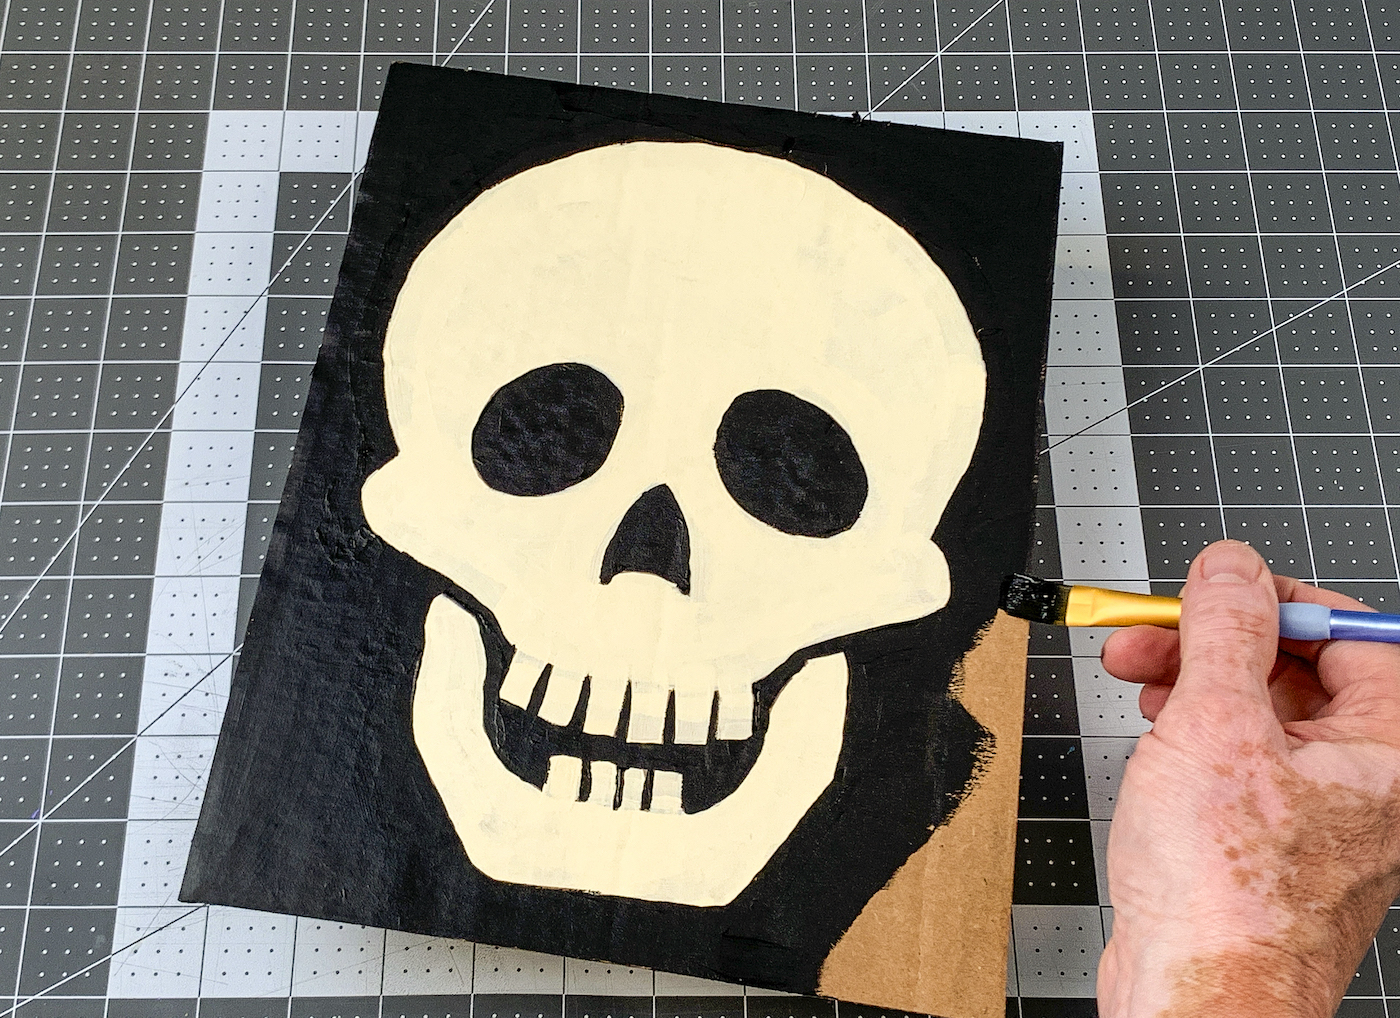 Painting black around the edges of the skull